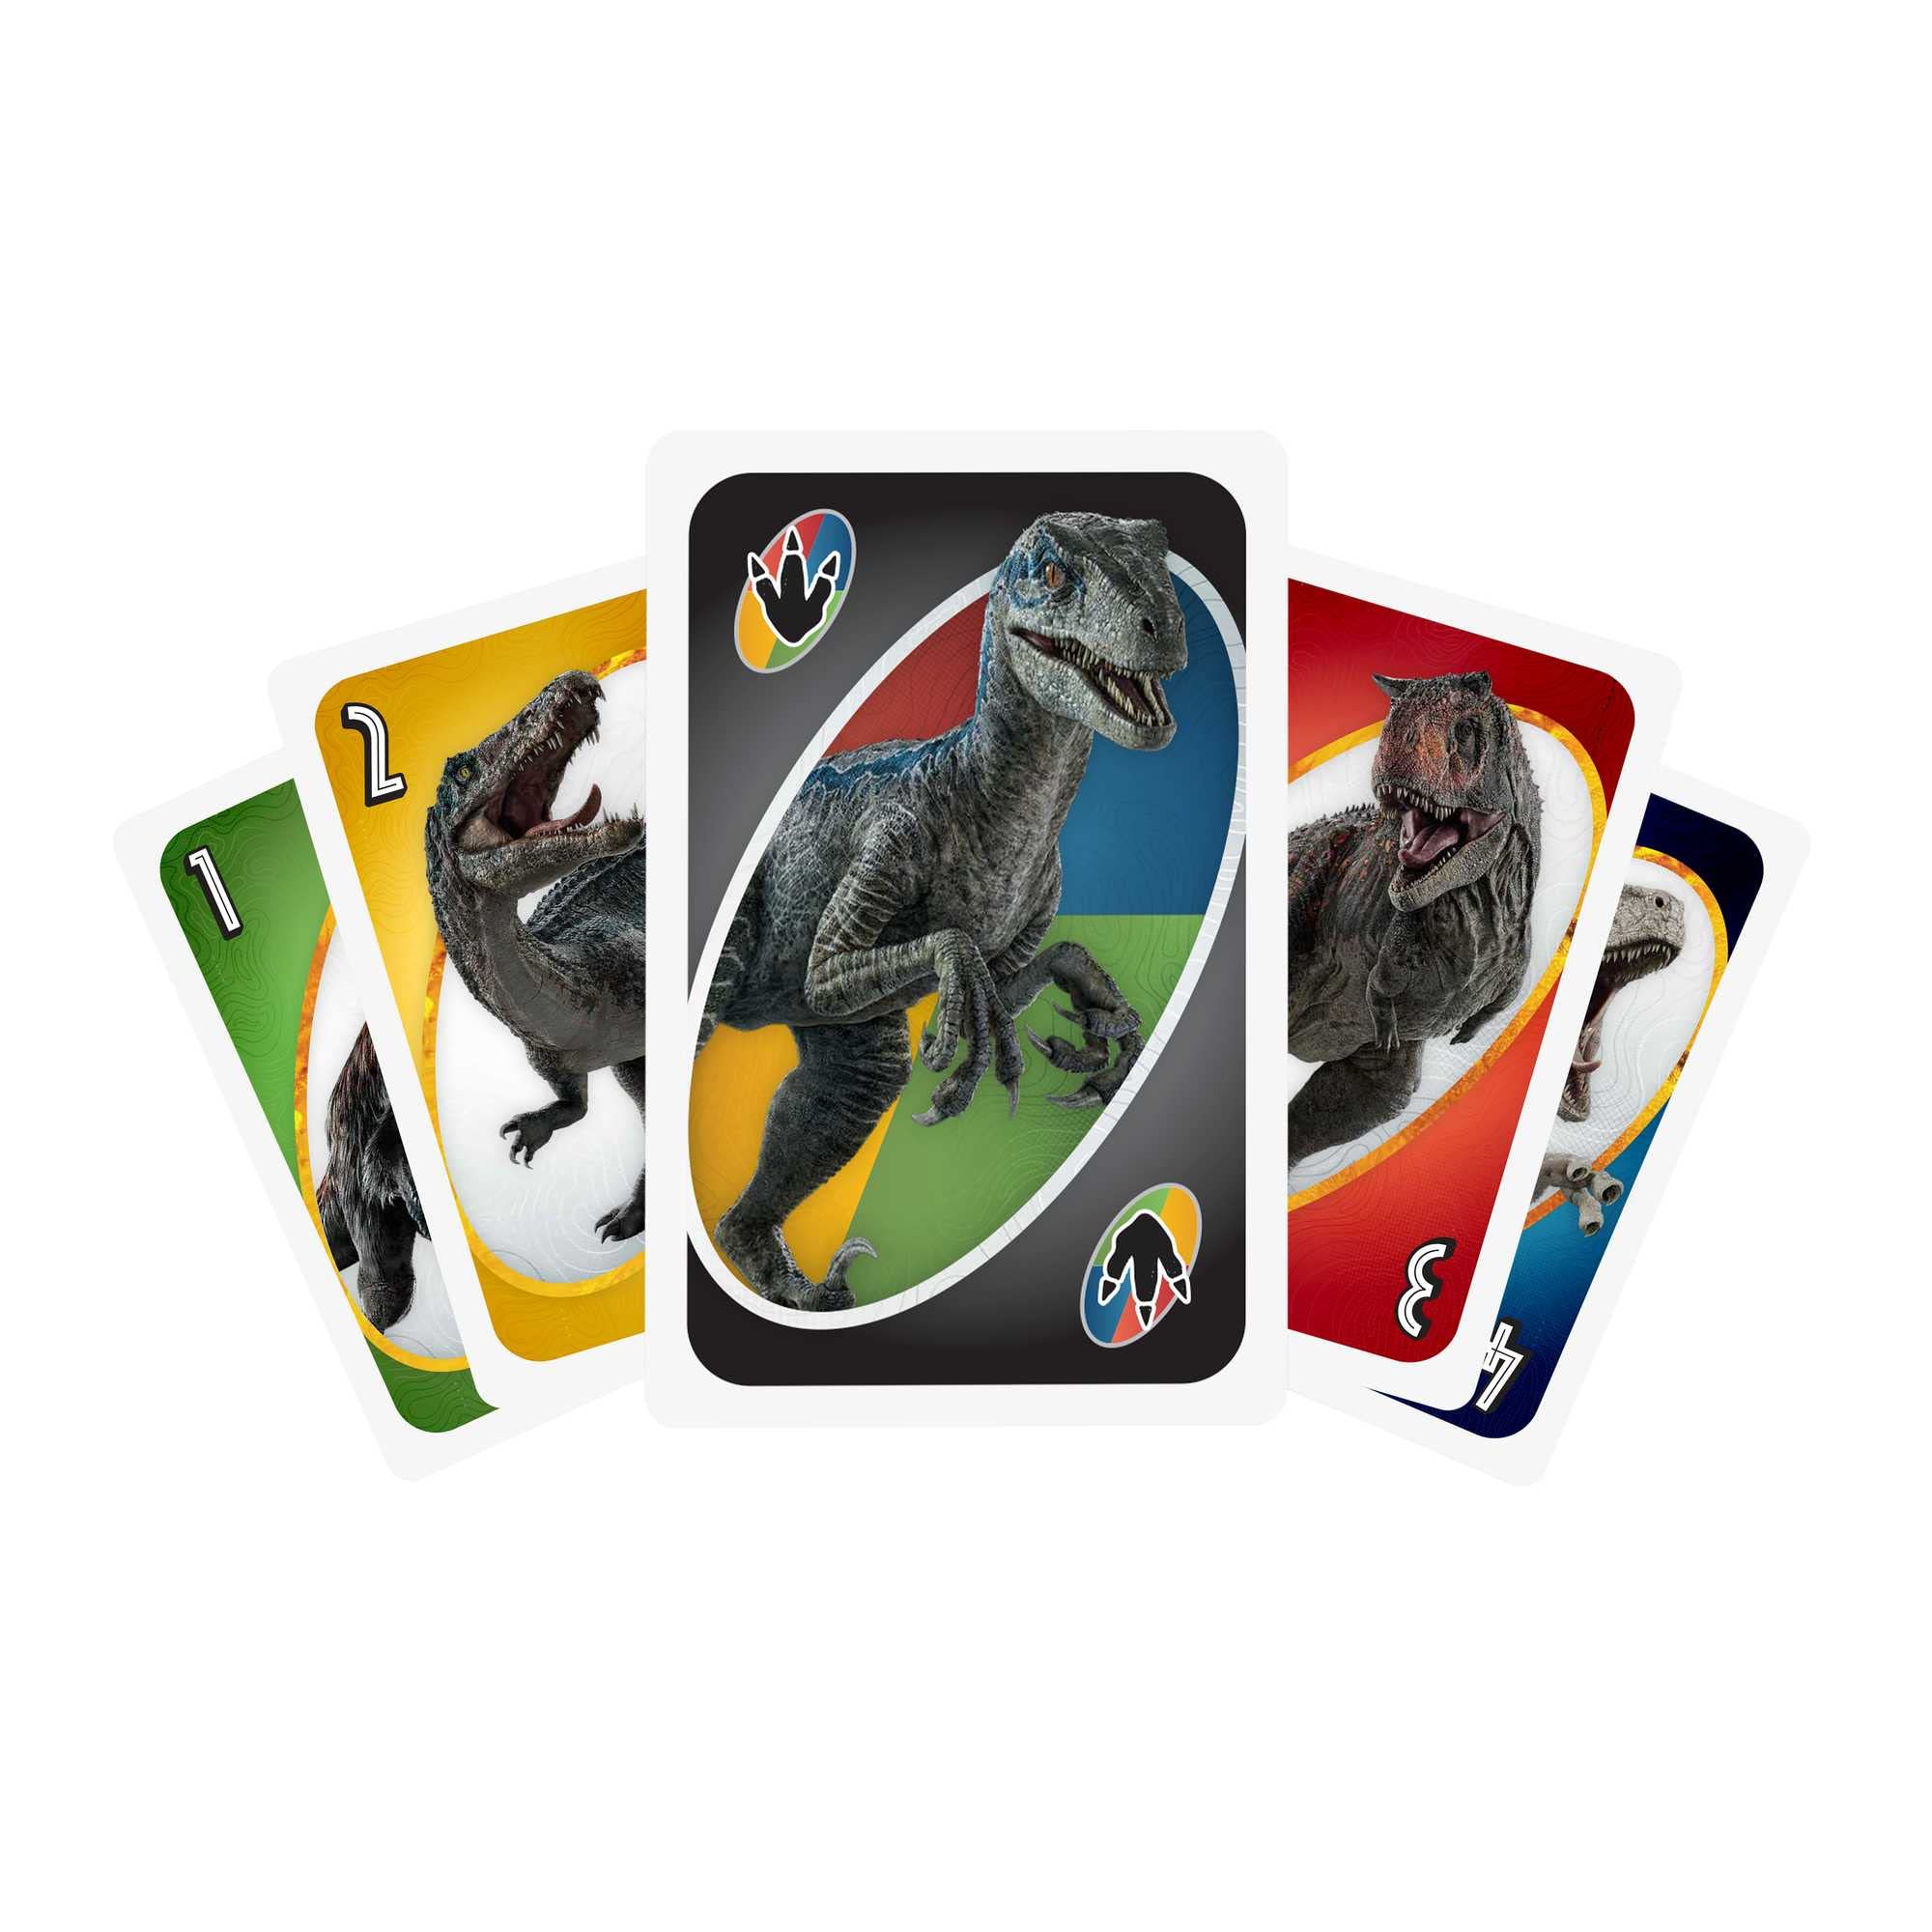 UNO Jurassic World Dominion Card Game with Themed Deck & Special Rule, Gift for Kid, Adult & Family Game Nights, Ages 7 Years Old & Up